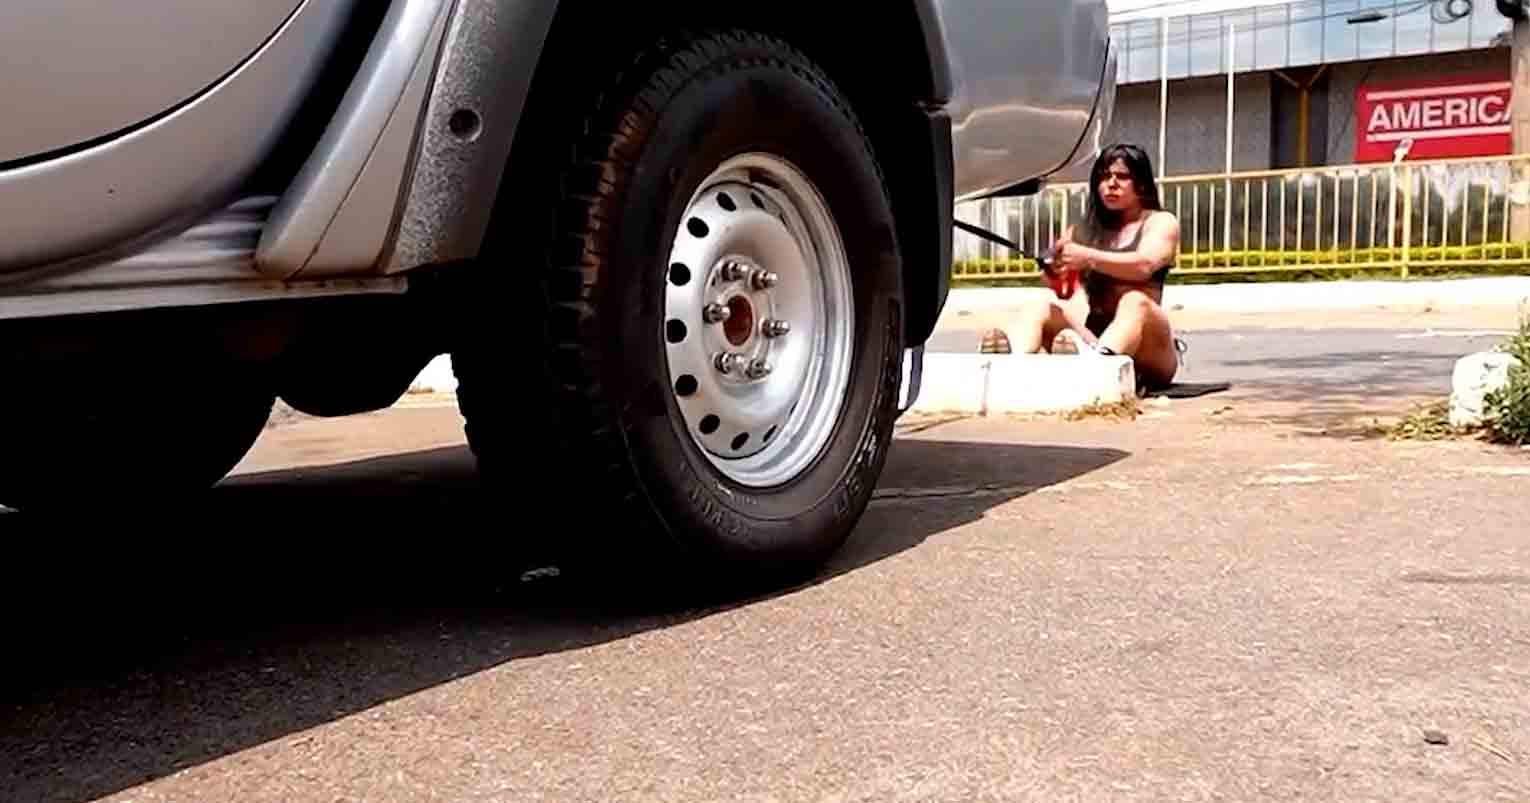 Video: Influencer Suzy Cortez scares her followers by pulling a pickup truck. Photo and video: Reproduction Instagram @suzyacortez